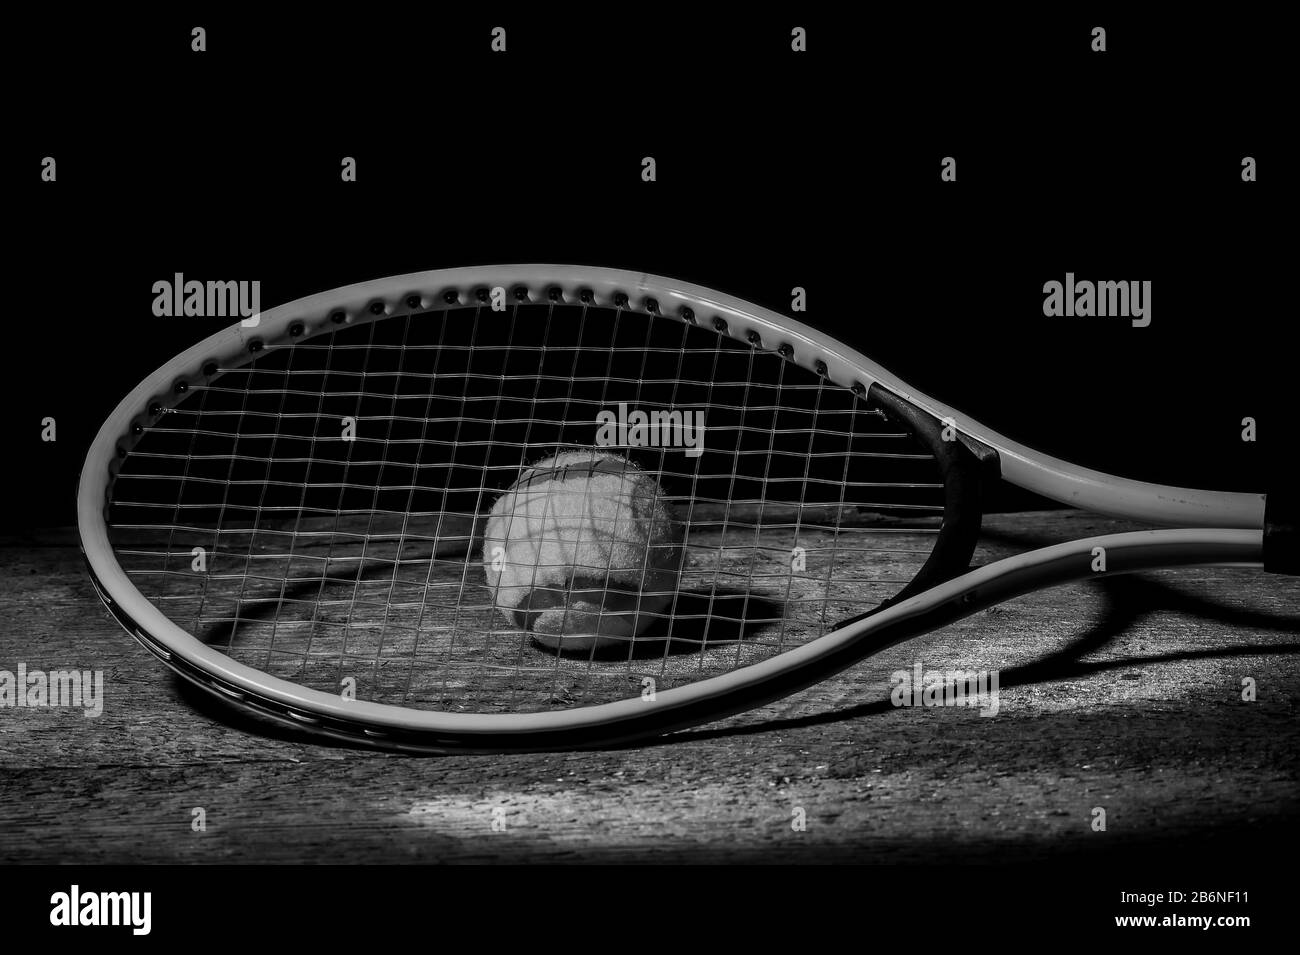 Tennis racket with tennis balls on wooden table with black background and copy space. Black and white Stock Photo